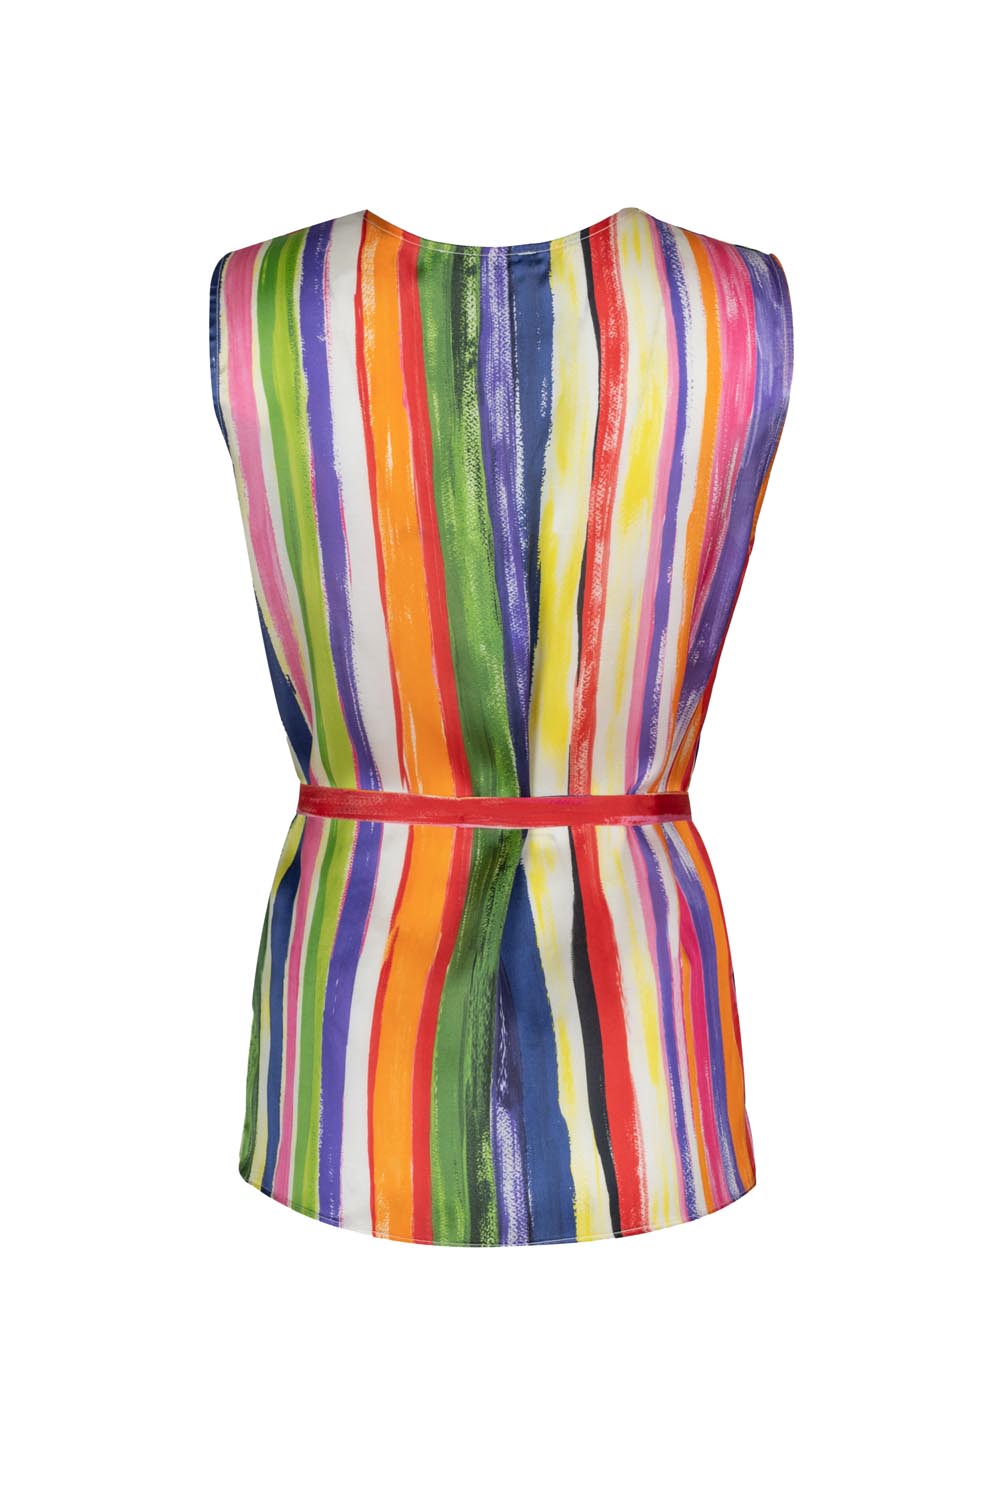 V Neck Striped Multicolor Tank Top with Tie Belt